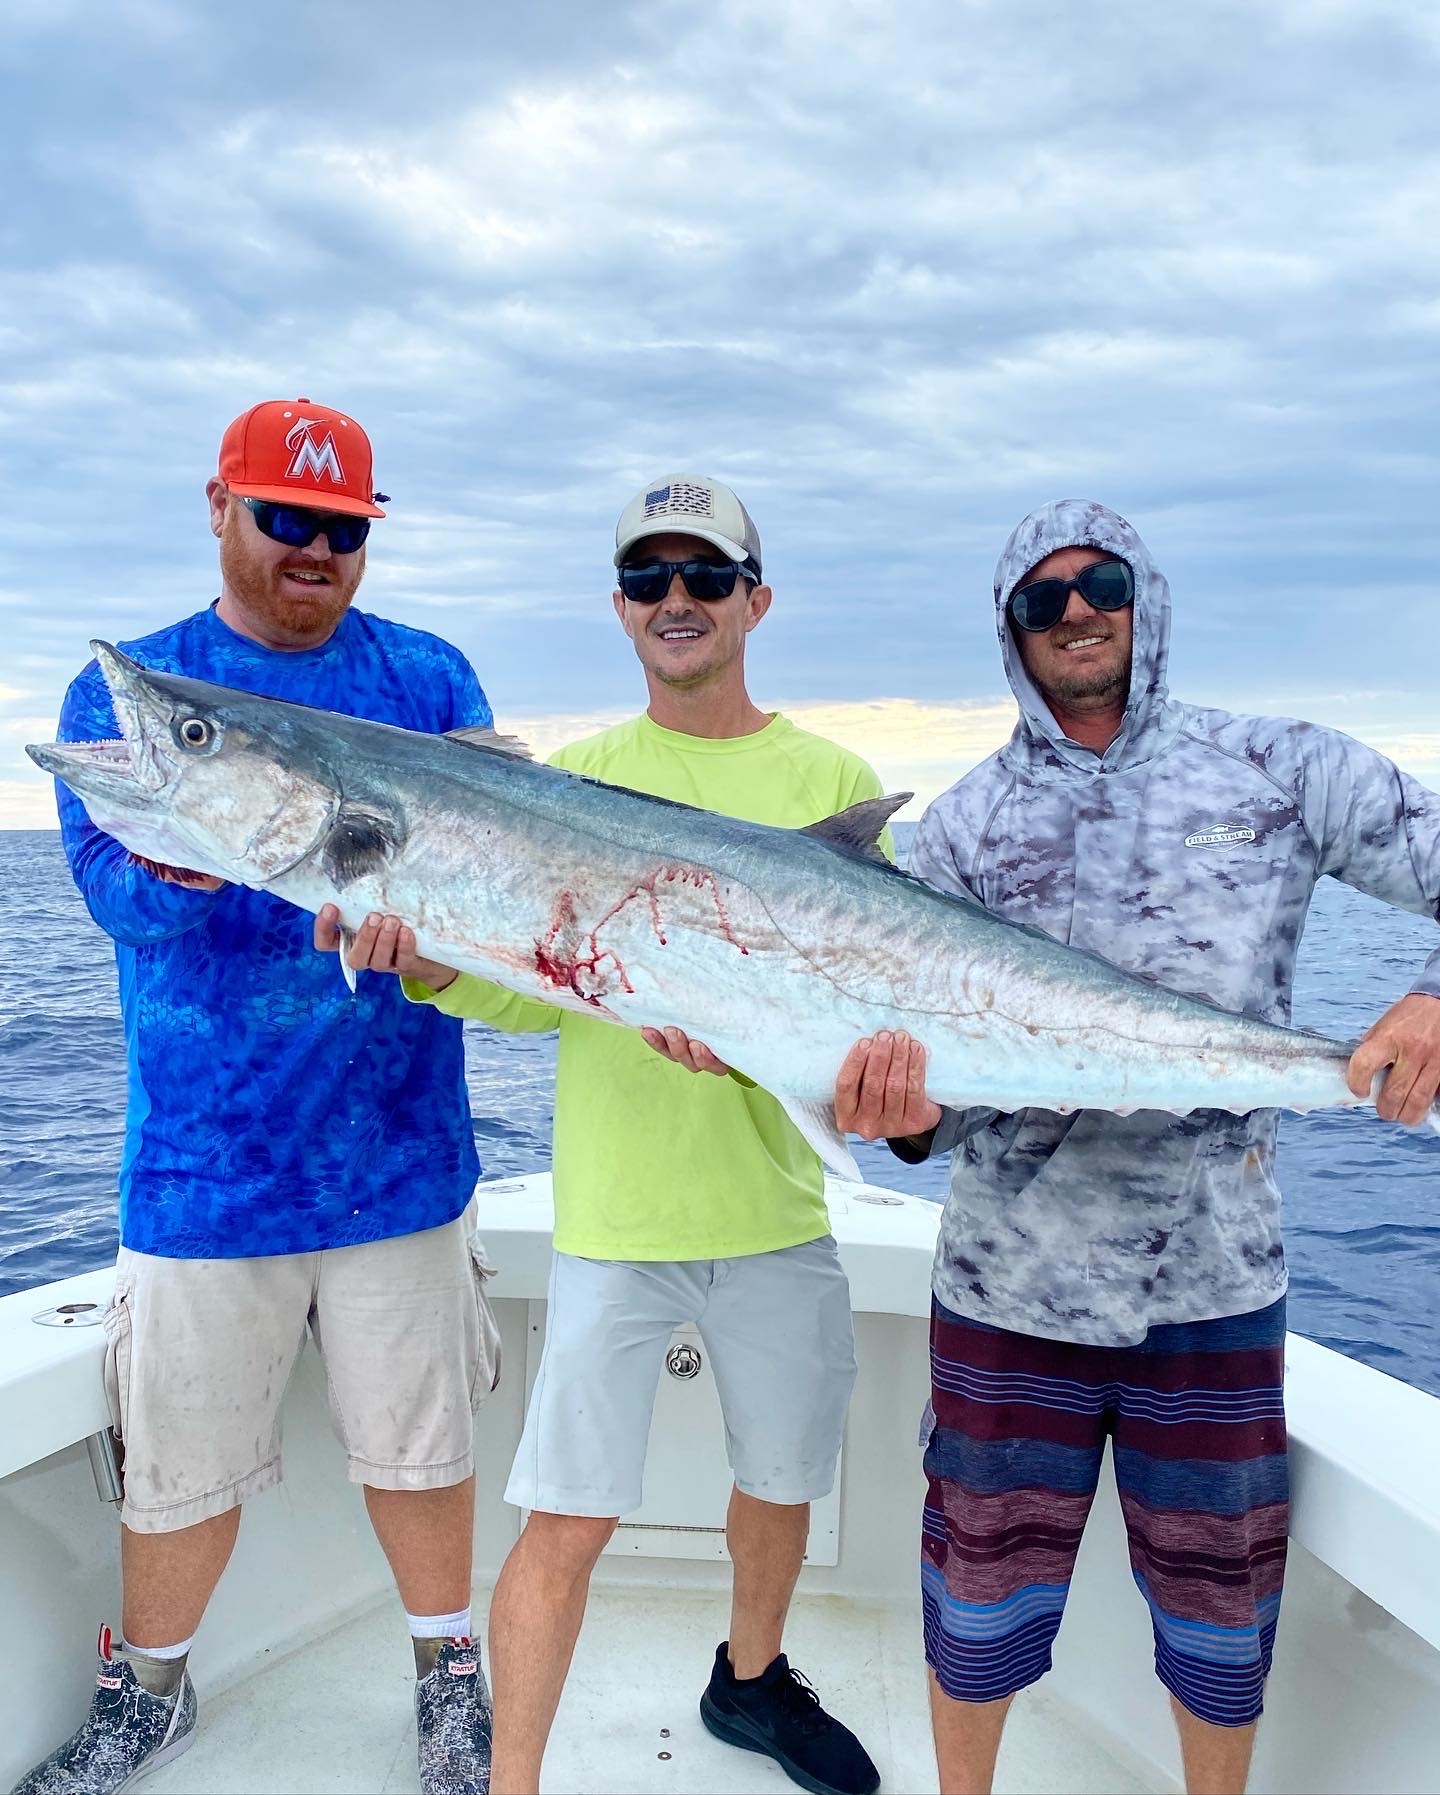 Fishing Tour in Fort Lauderdale